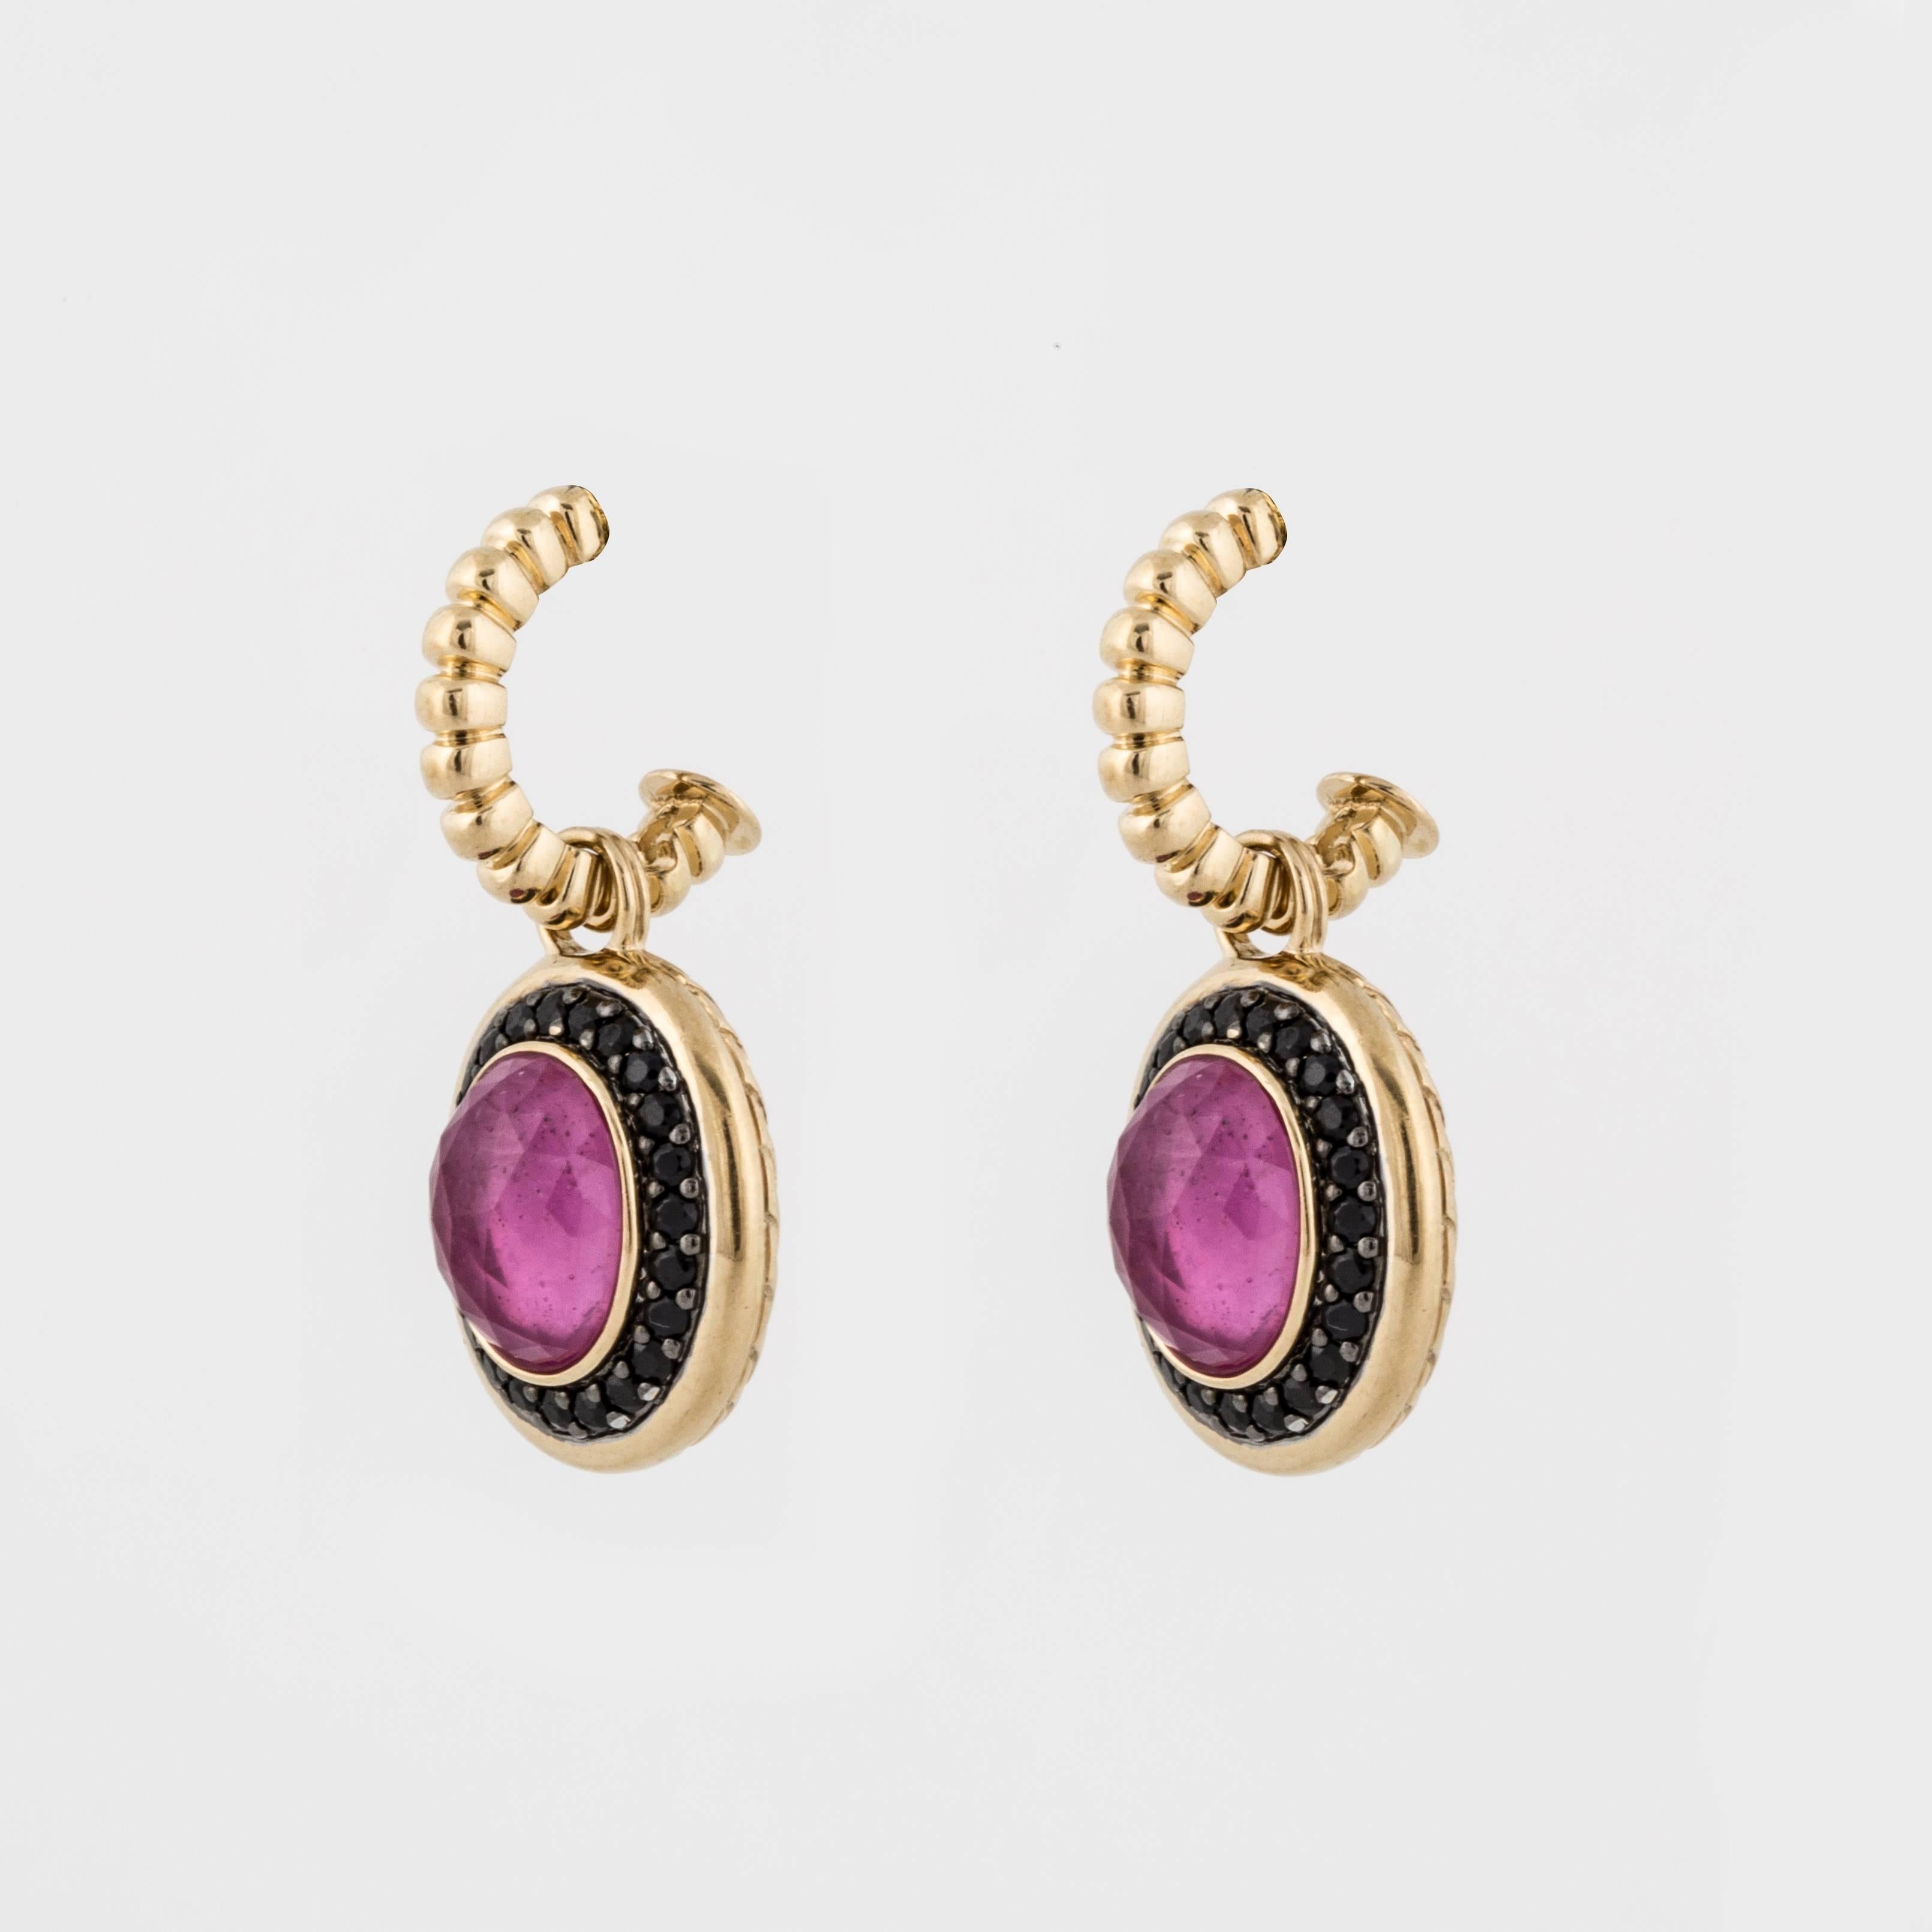 Yellow gold and silver earrings marked "JH 18K" on the back.  There are 48 (forty eight) round black sapphires totaling 1.20 carats.  The black sapphires are set in silver.  The 2 (two) oval stones are faceted pink sapphire doublets. 